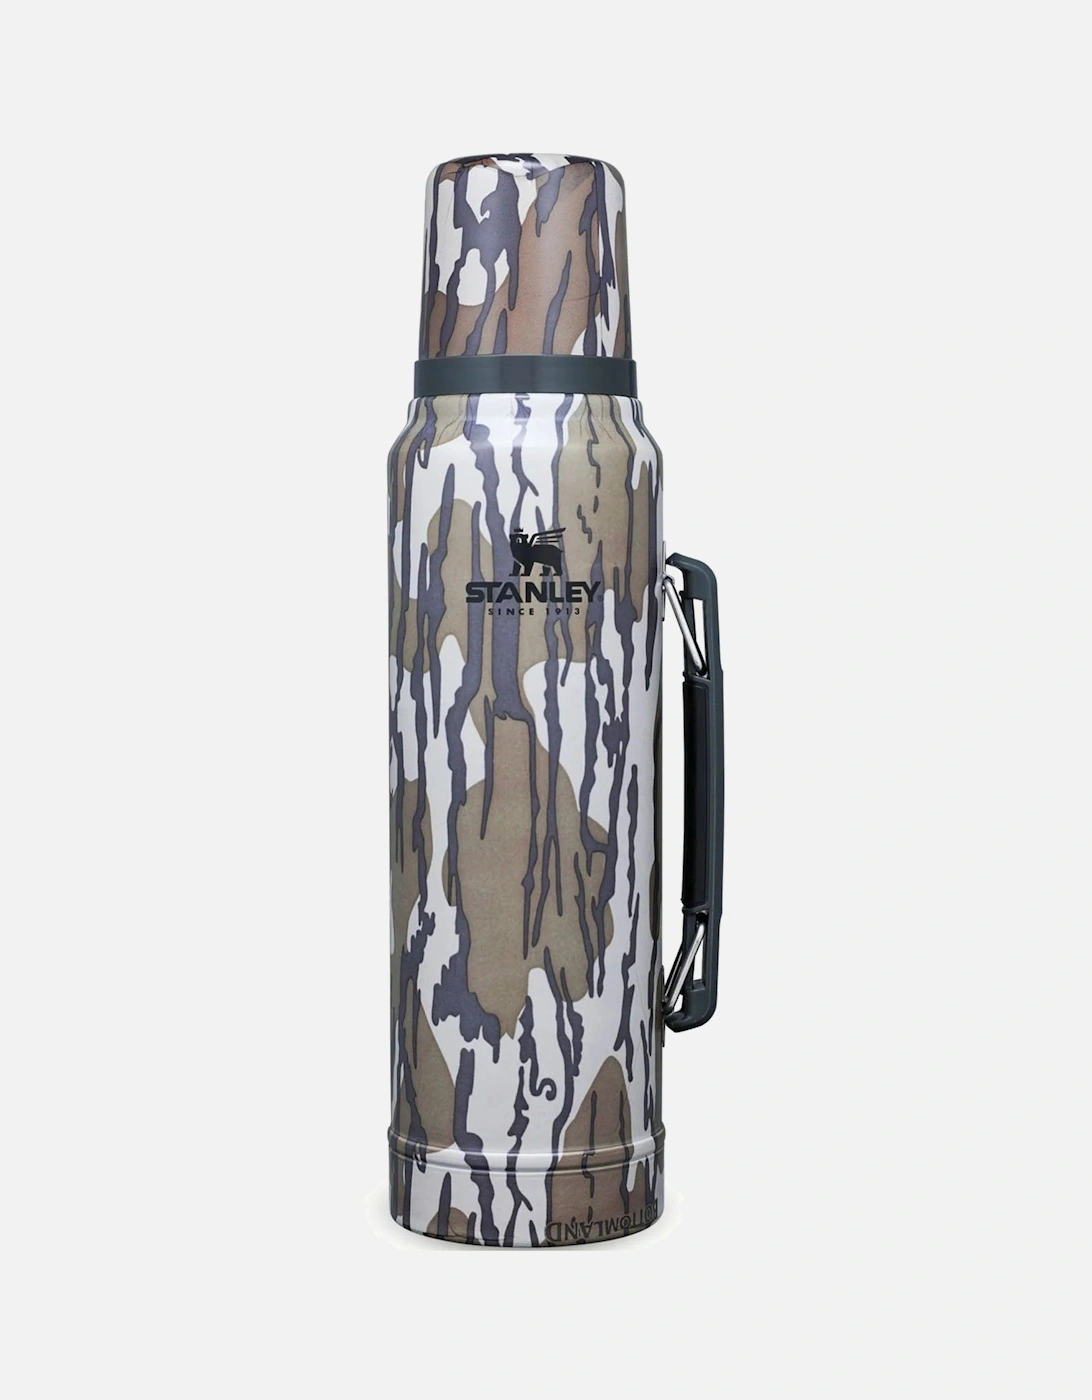 1L Classic Legendary Thermal Cold Water Bottle, 39 of 38